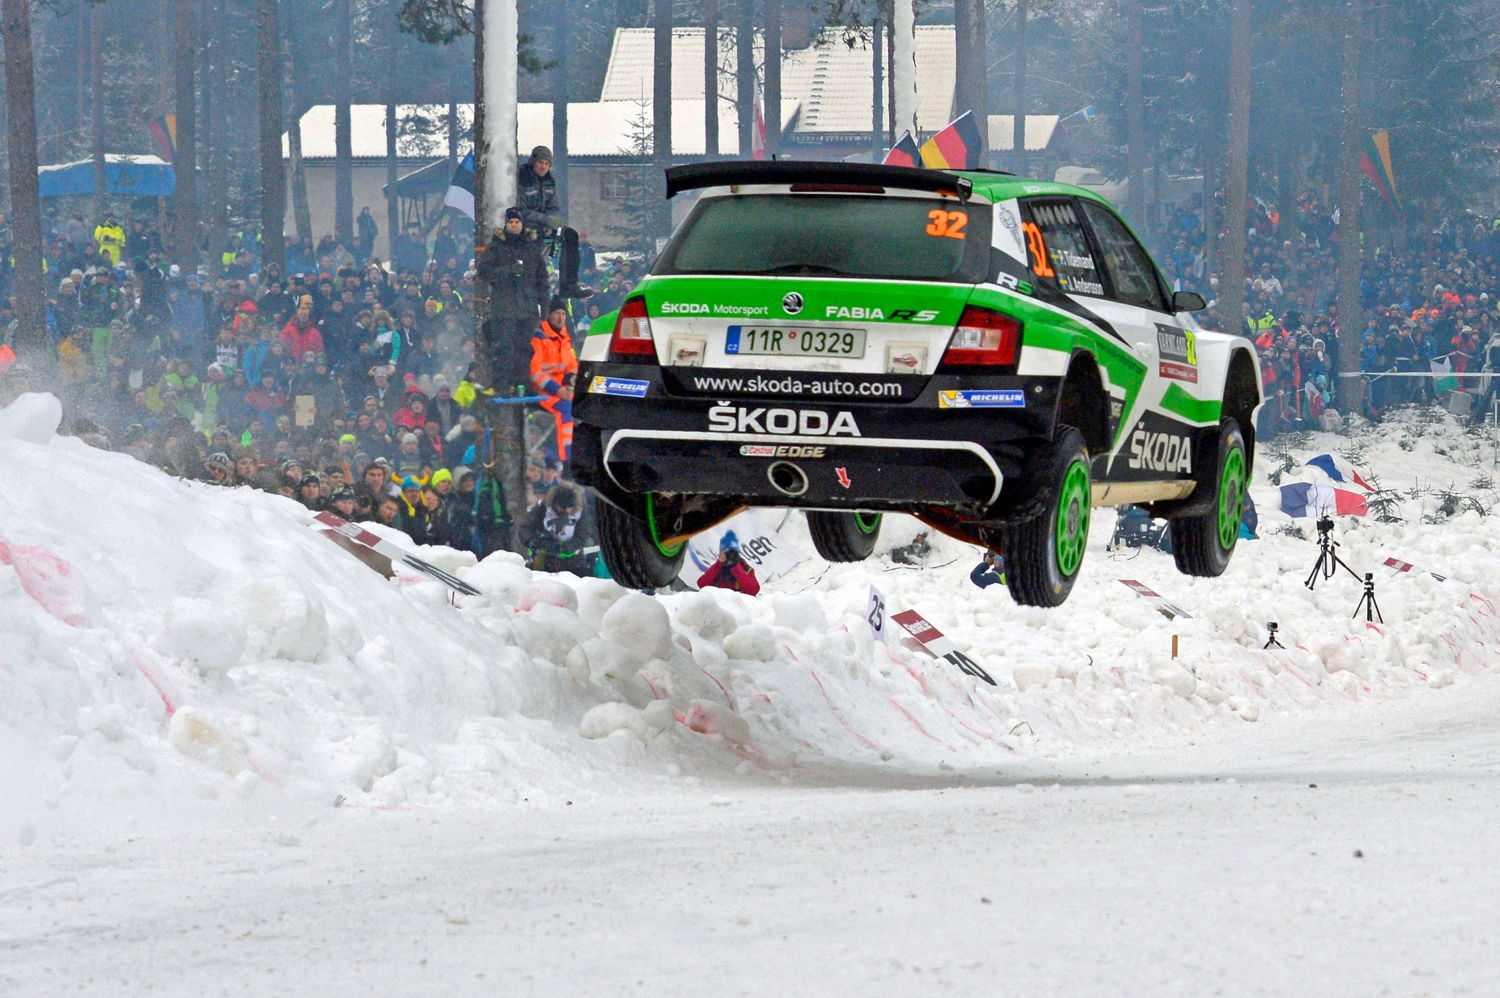 The ŠKODA FABIA R5 showed all its class on the snow and ice in Sweden. In Mexico, it will rely on its familiar qualities on gravel.